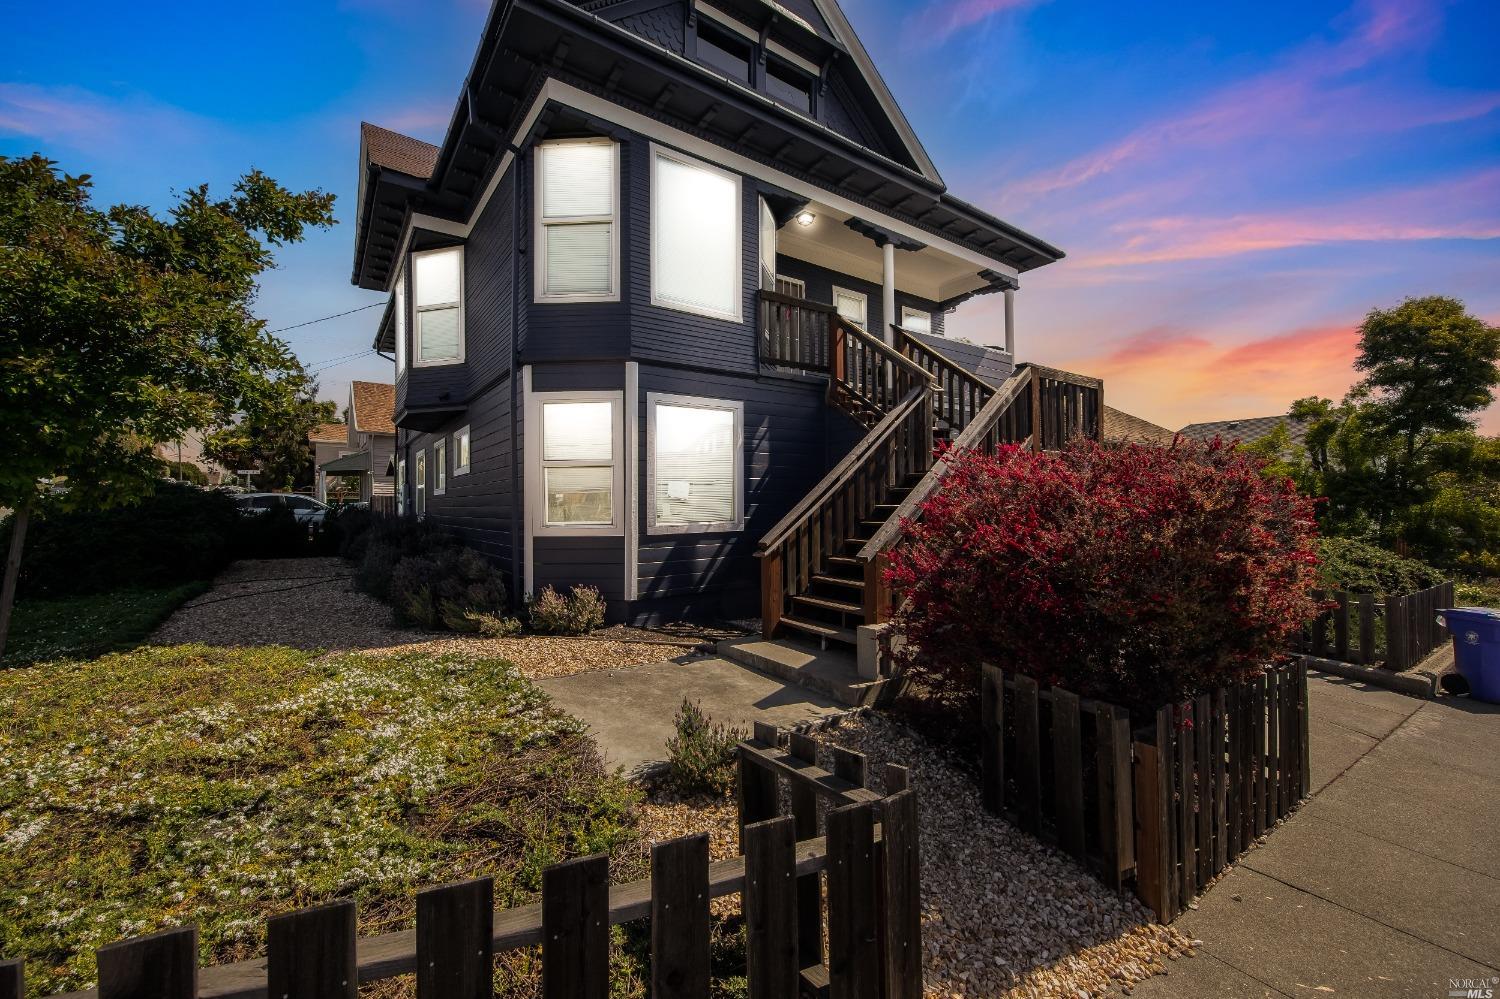 Wonderful Opportunity To Own A Well Maintained, Updated Victorian Duplex With A View!! Two Big 3 Bedroom 2 Bath Units In Vallejo's Historical District. Walking Distance To The Ferry, Restaurants, And To Downtown. Perfect For An Owner Occupant, Or To Add To Your Investment Portfolio. 6.069% Cap Rate, With Big Upside If At Market Rate Rents. You Don't Want To Miss This!